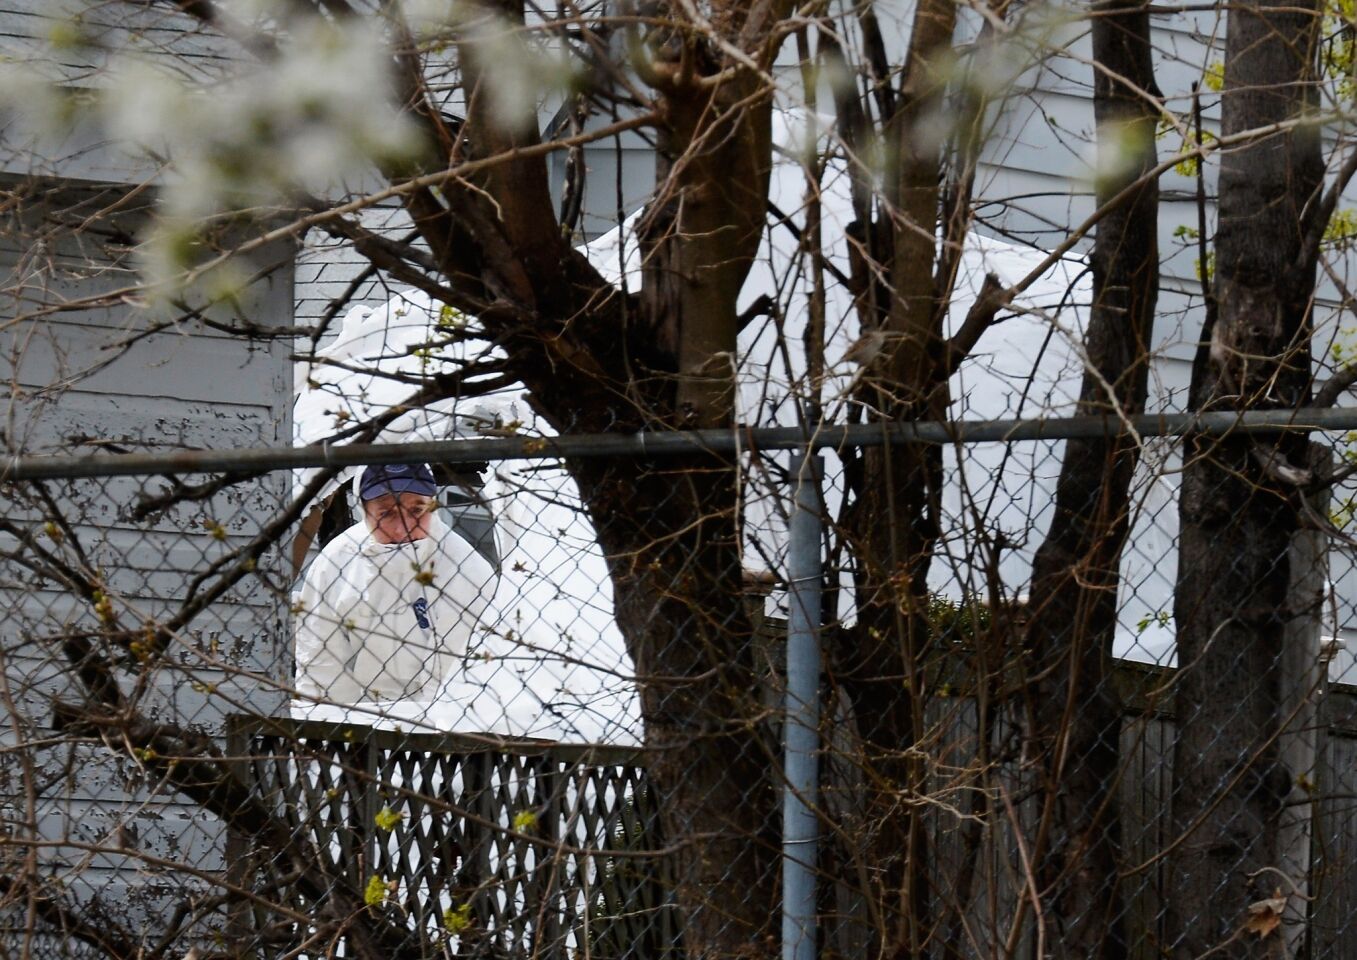 An FBI investigator wearing white overalls stands inside the boat where the bombing suspect was hiding from police on Franklin Street in Watertown, Mass. A manhunt for suspect Dzhokhar A. Tsarnaev, 19, ended Friday after he was apprehended on the boat. His brother Tamerlan Tsarnaev, 26, the other suspect, was shot and killed after a car chase and shootout with police.